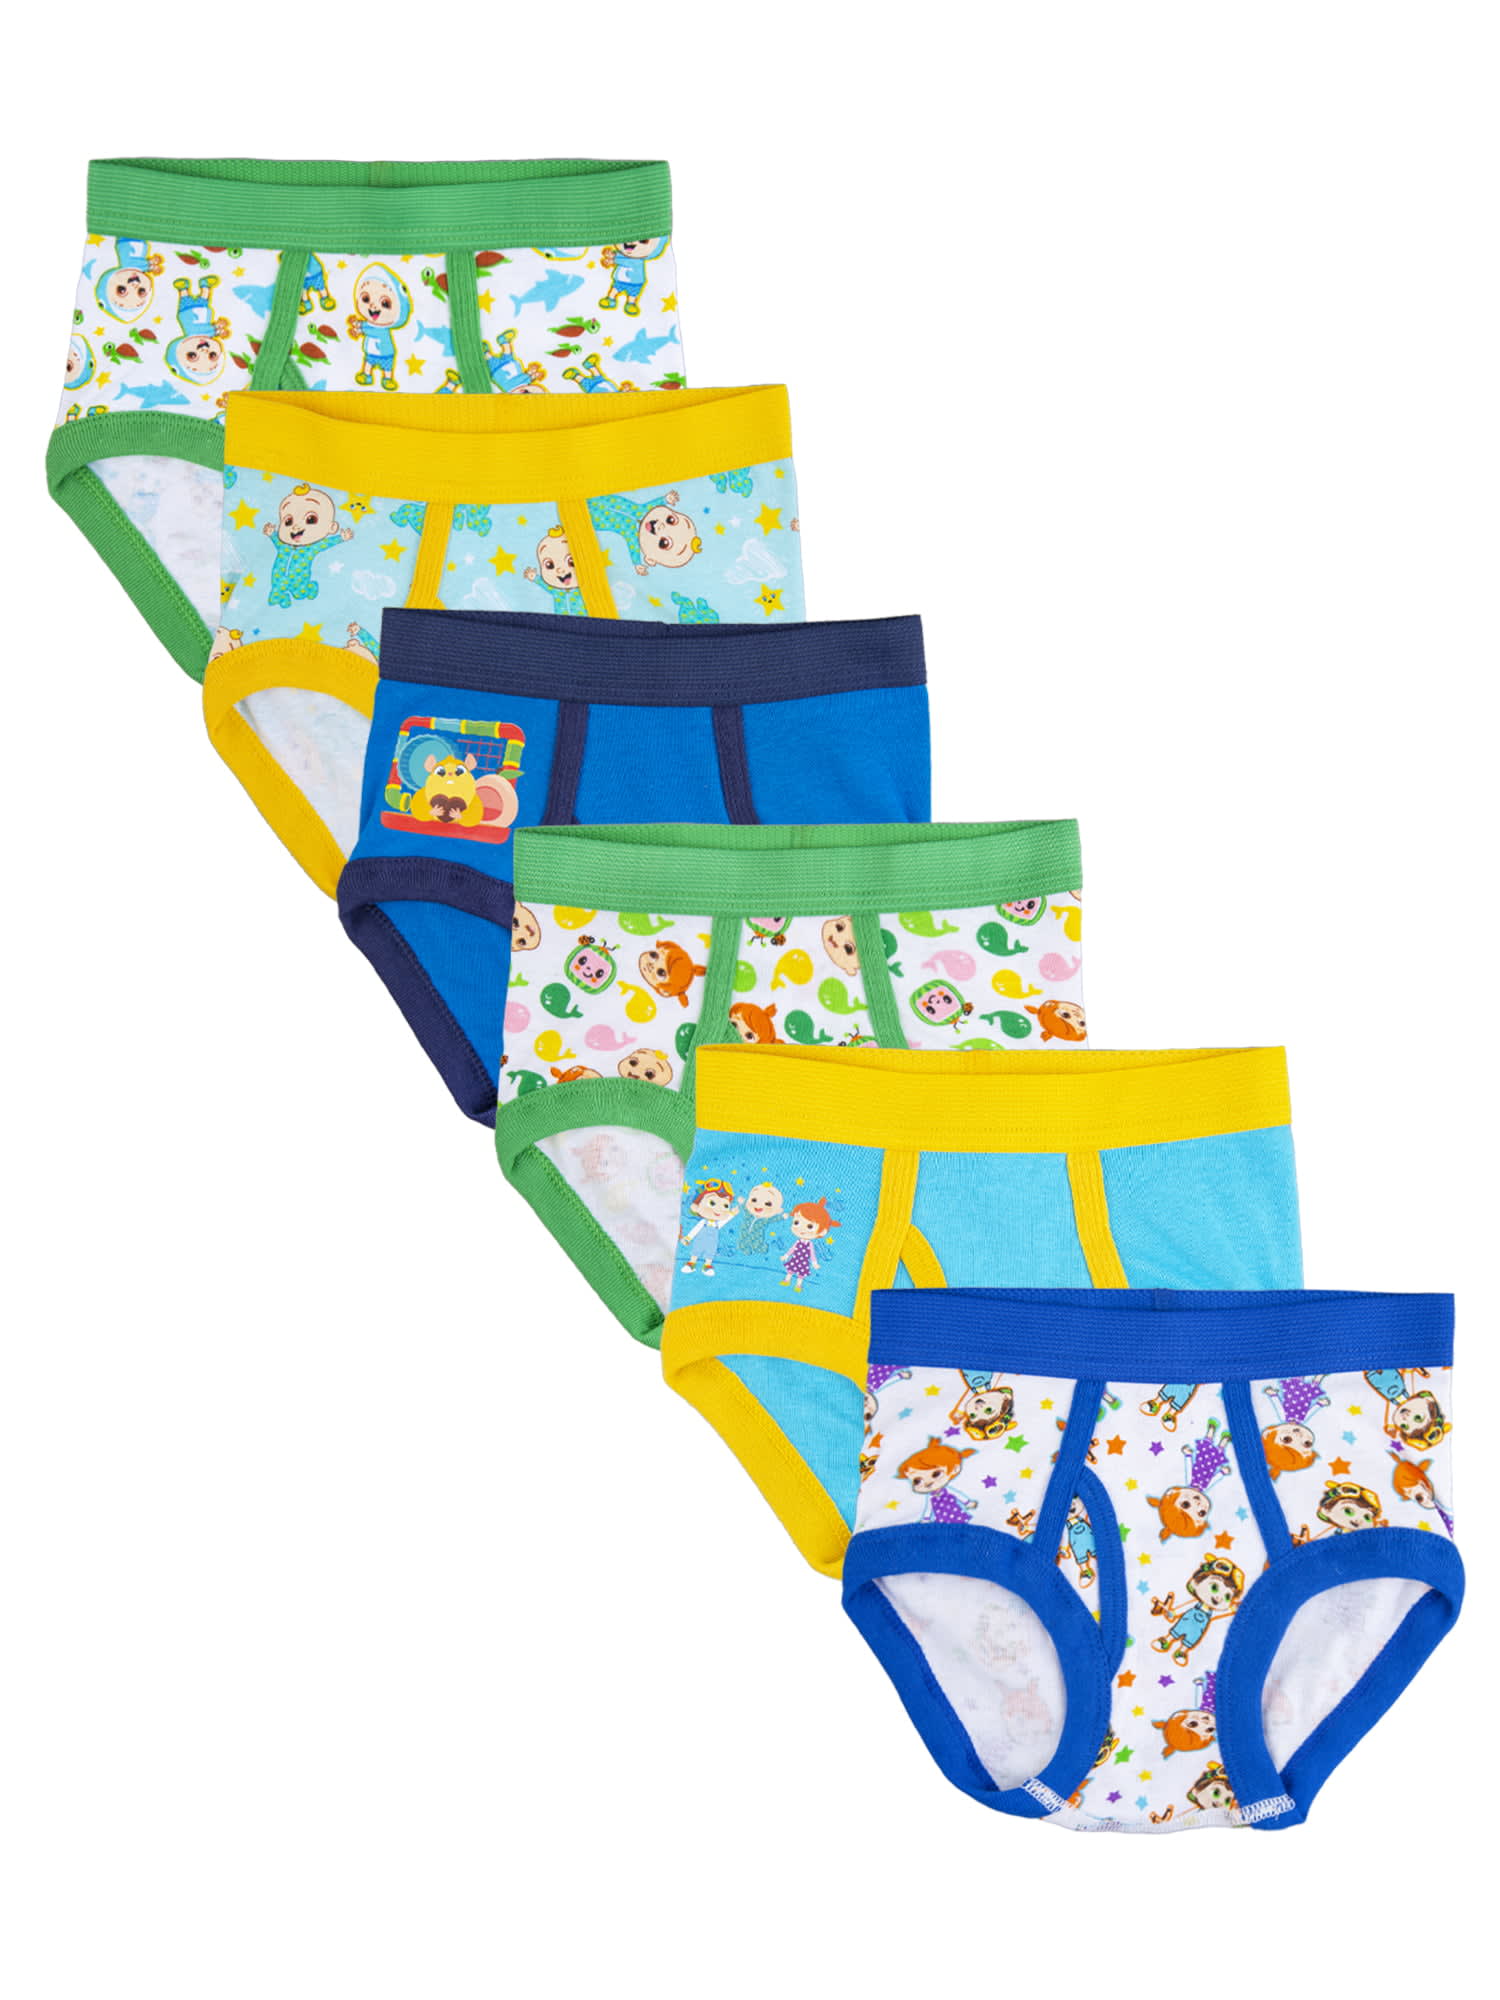 Cocomelon Toddler Boys Training Pants Underwear NWT 6 Pairs